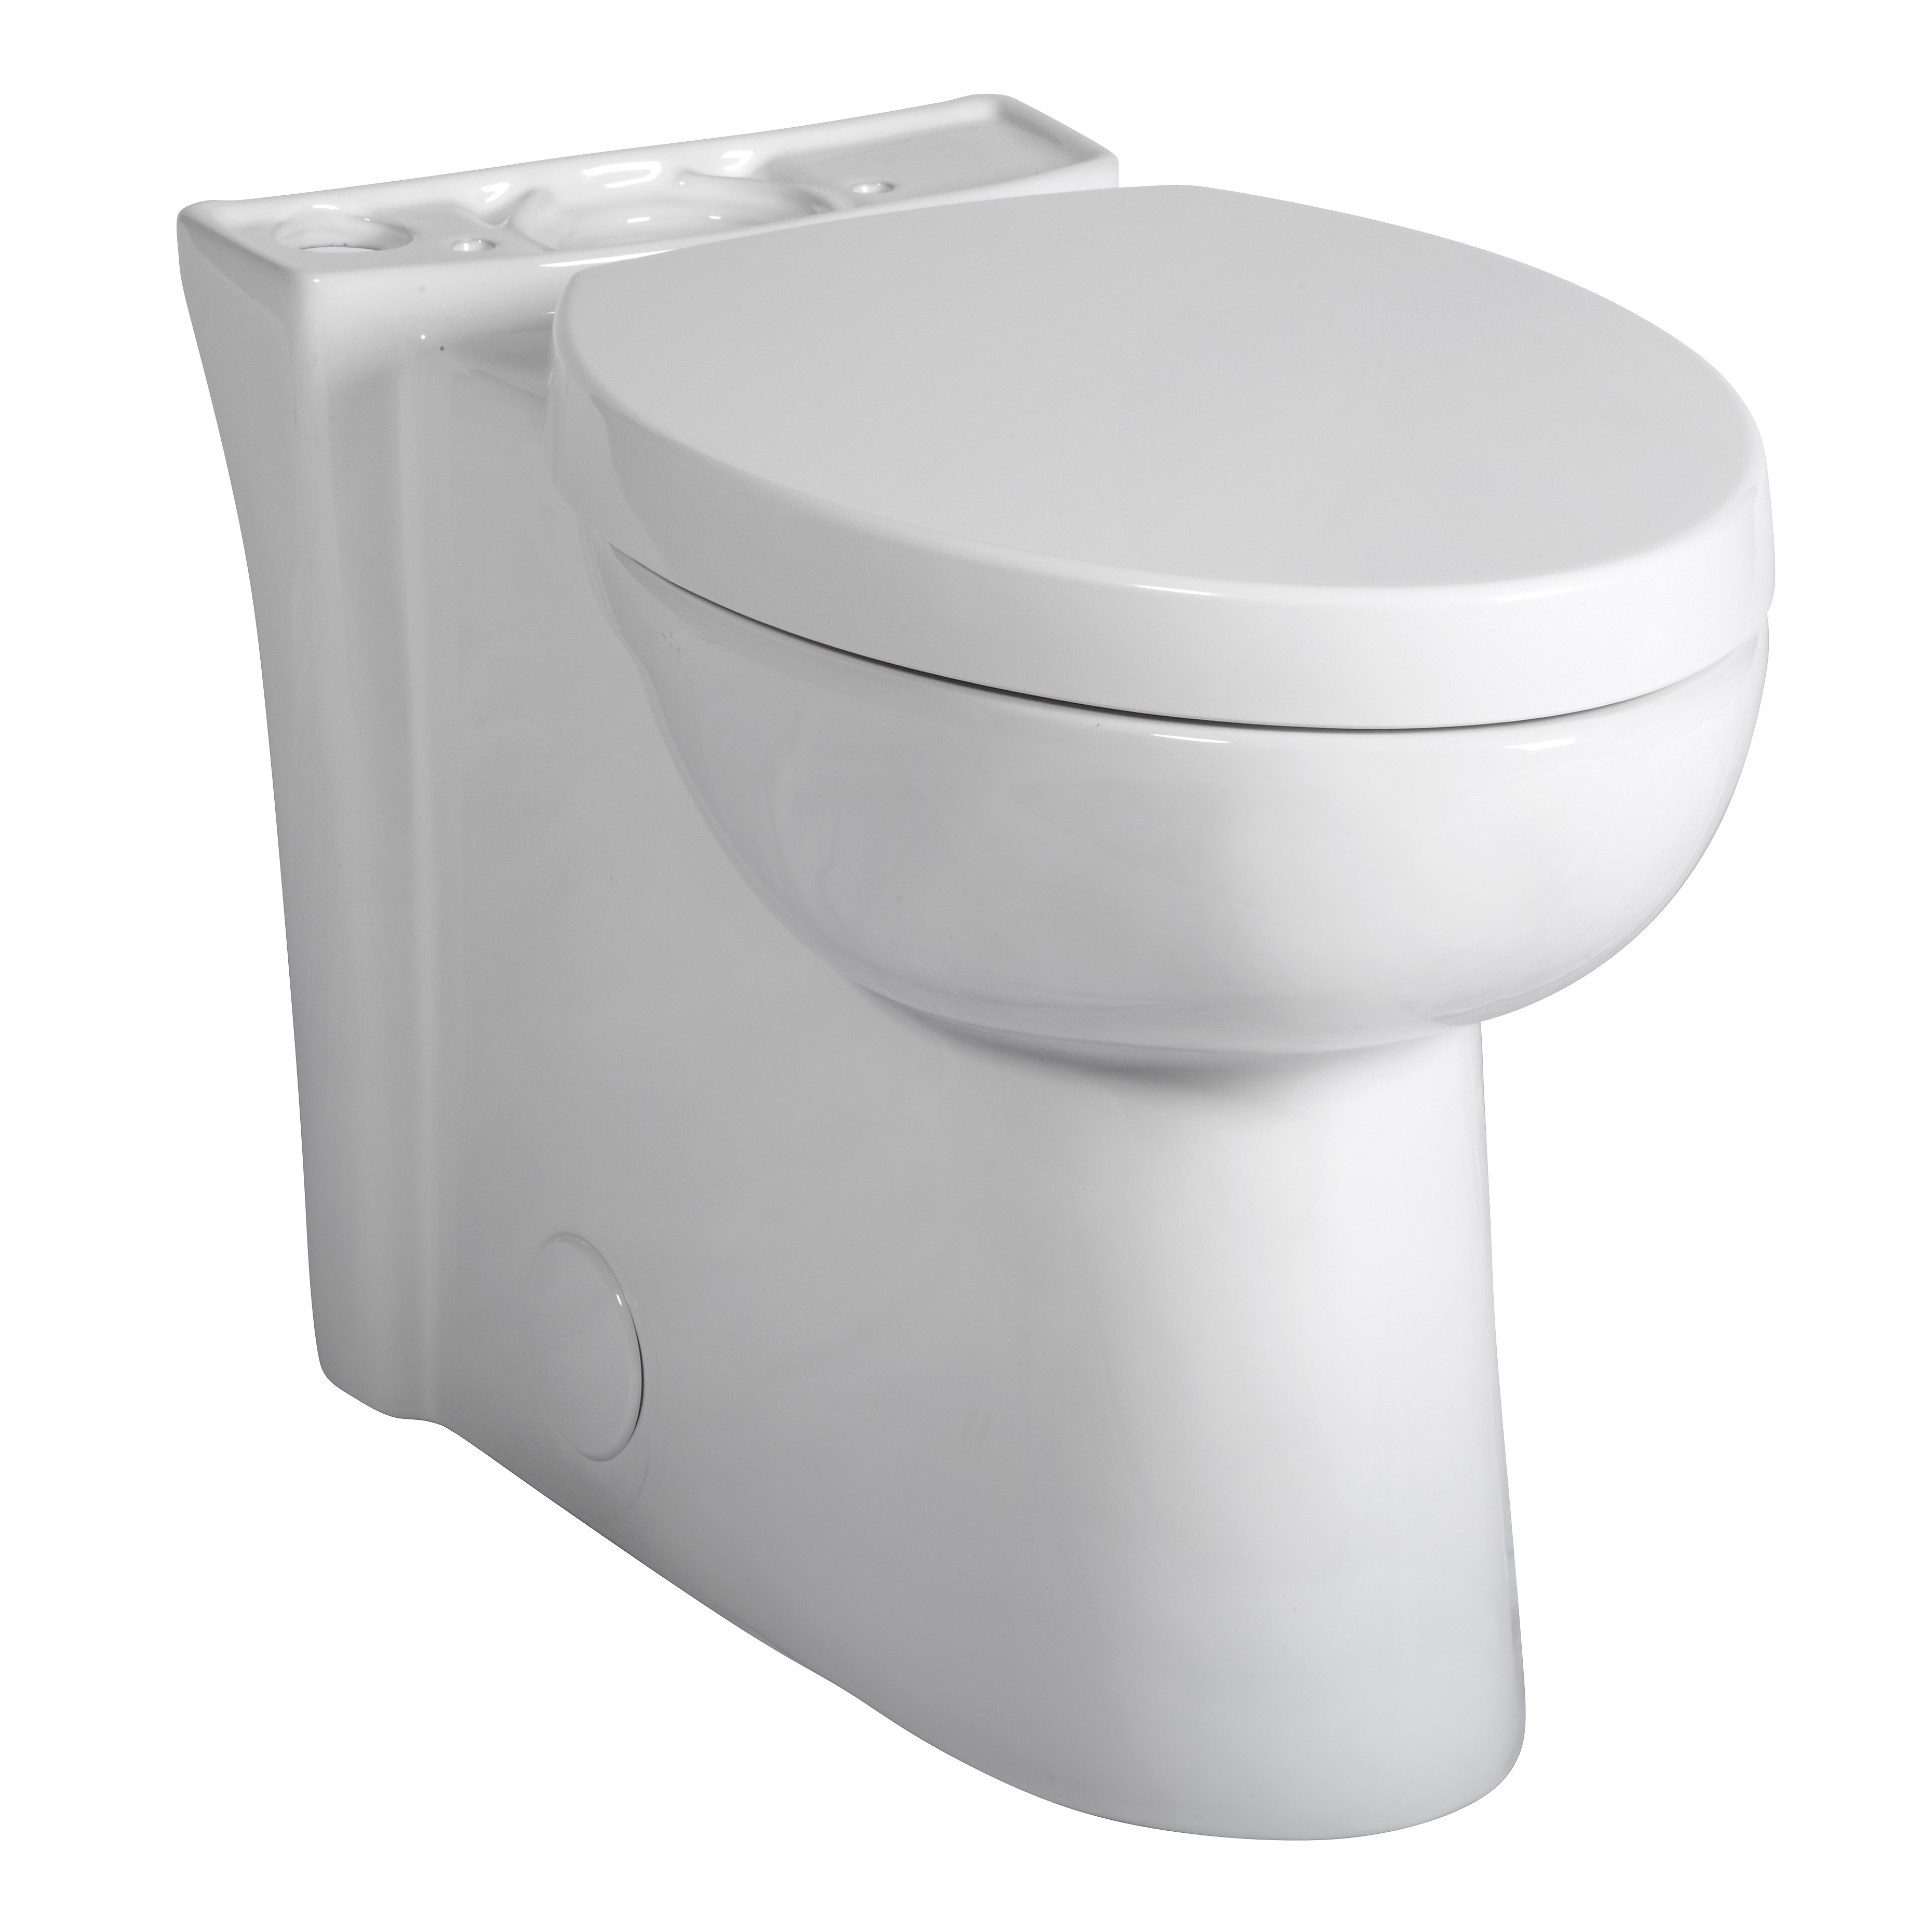 American Standard 3075.120.020 Toilet Bowl, White, Elongated, 12 in Rough-In, 16-1/2 in H Rim, 2-1/8 in Trapway, Studio™ Activate™ Right Height™